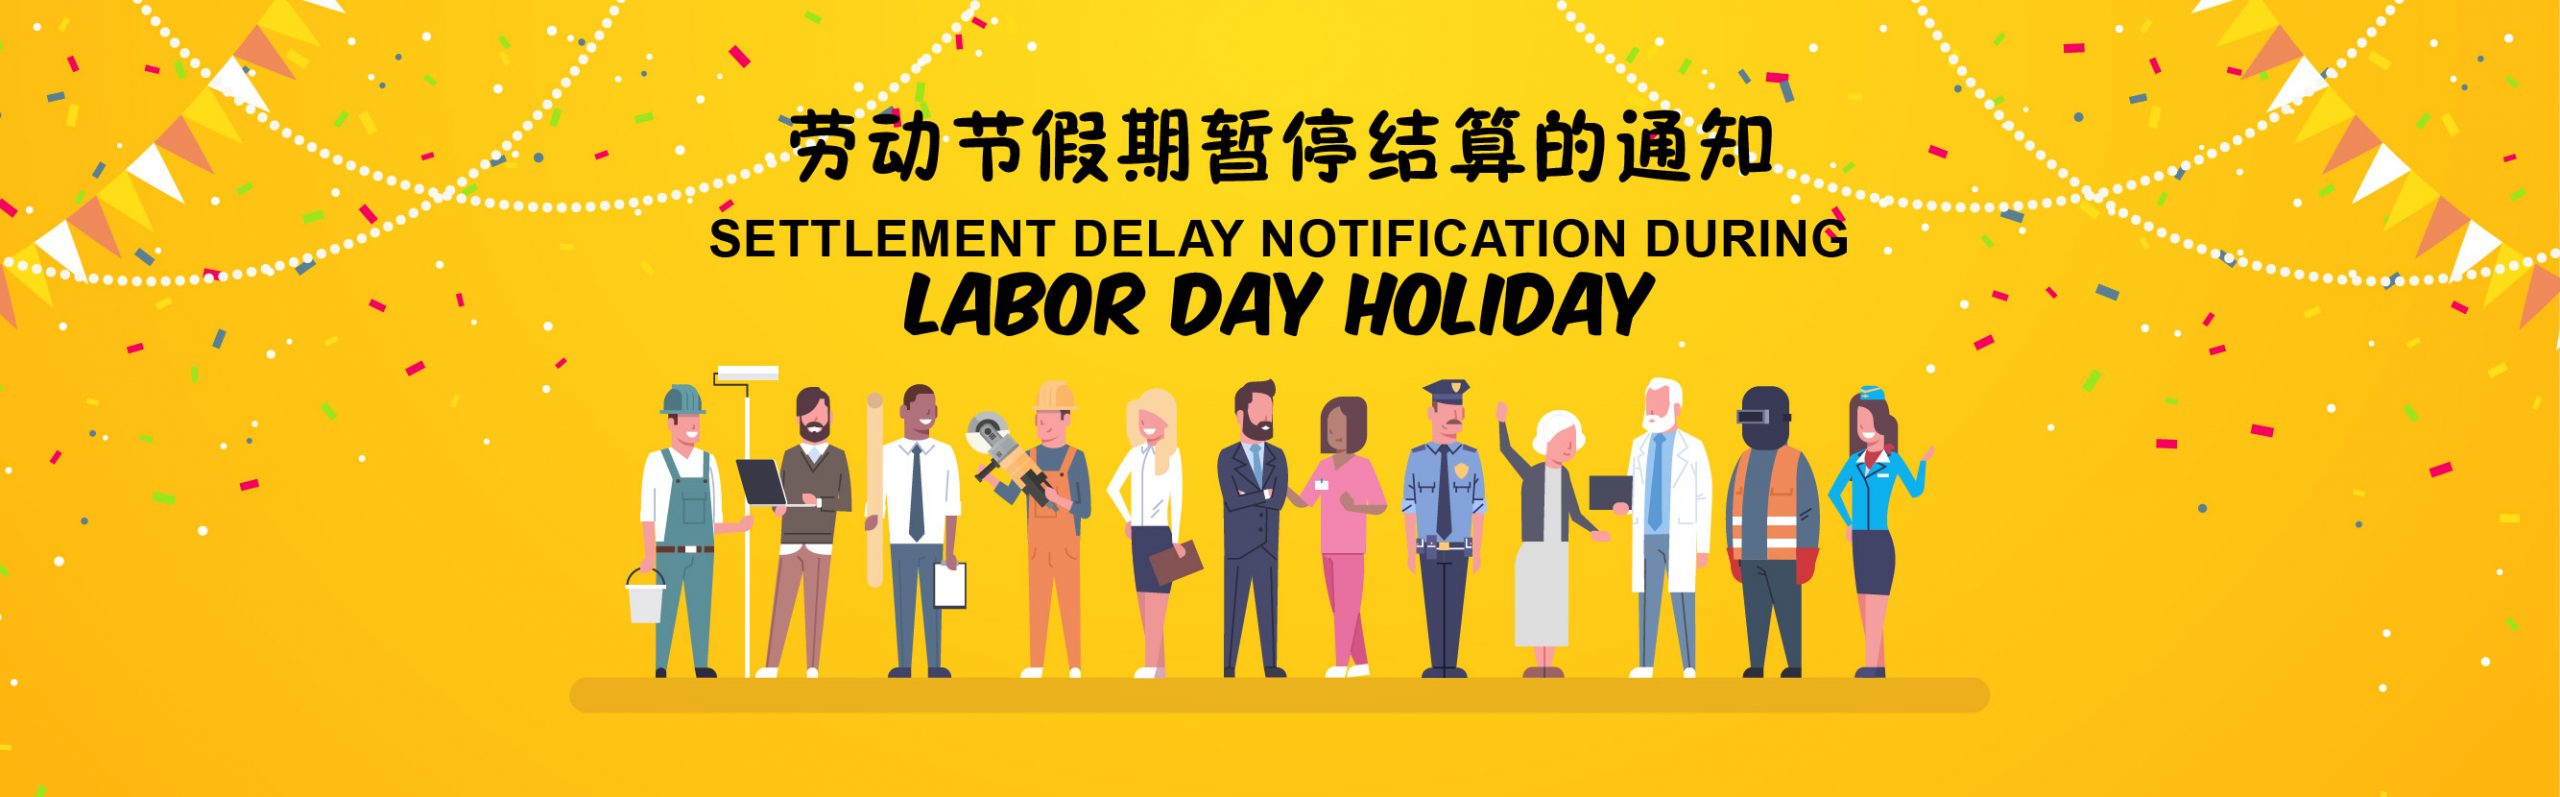 Settlement Delay Notification During Labor Day holiday 关于劳动节假期暂停结算的通知